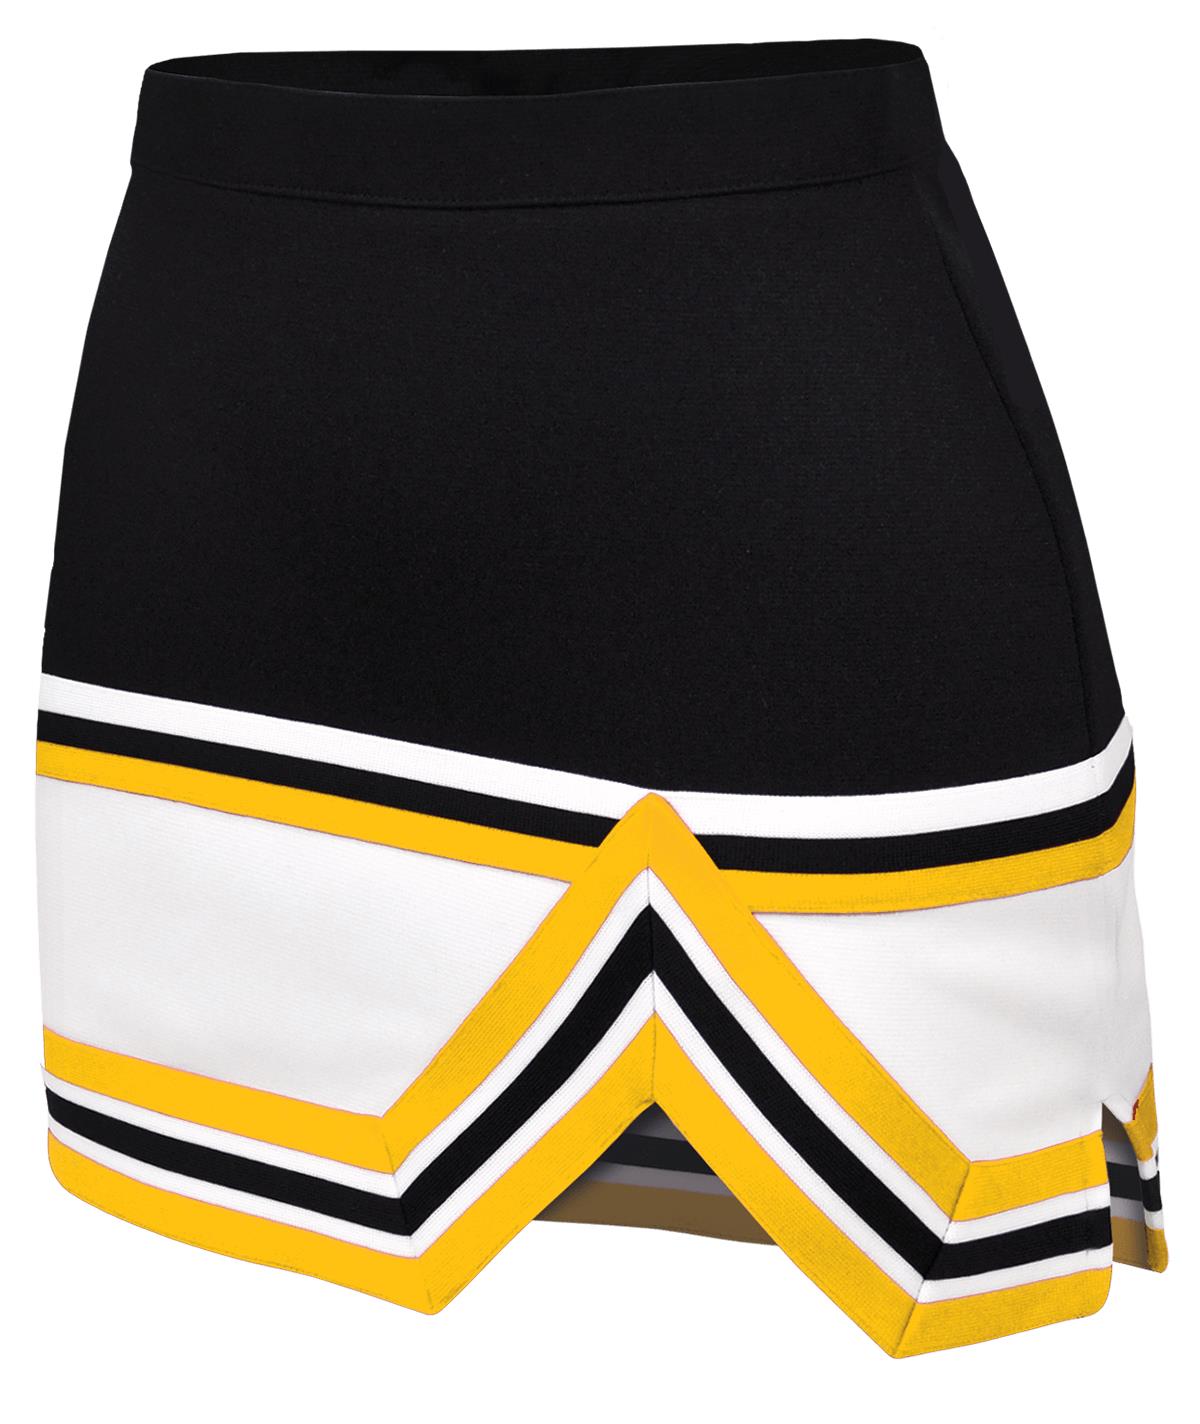 Sideline Collection Skirt Options